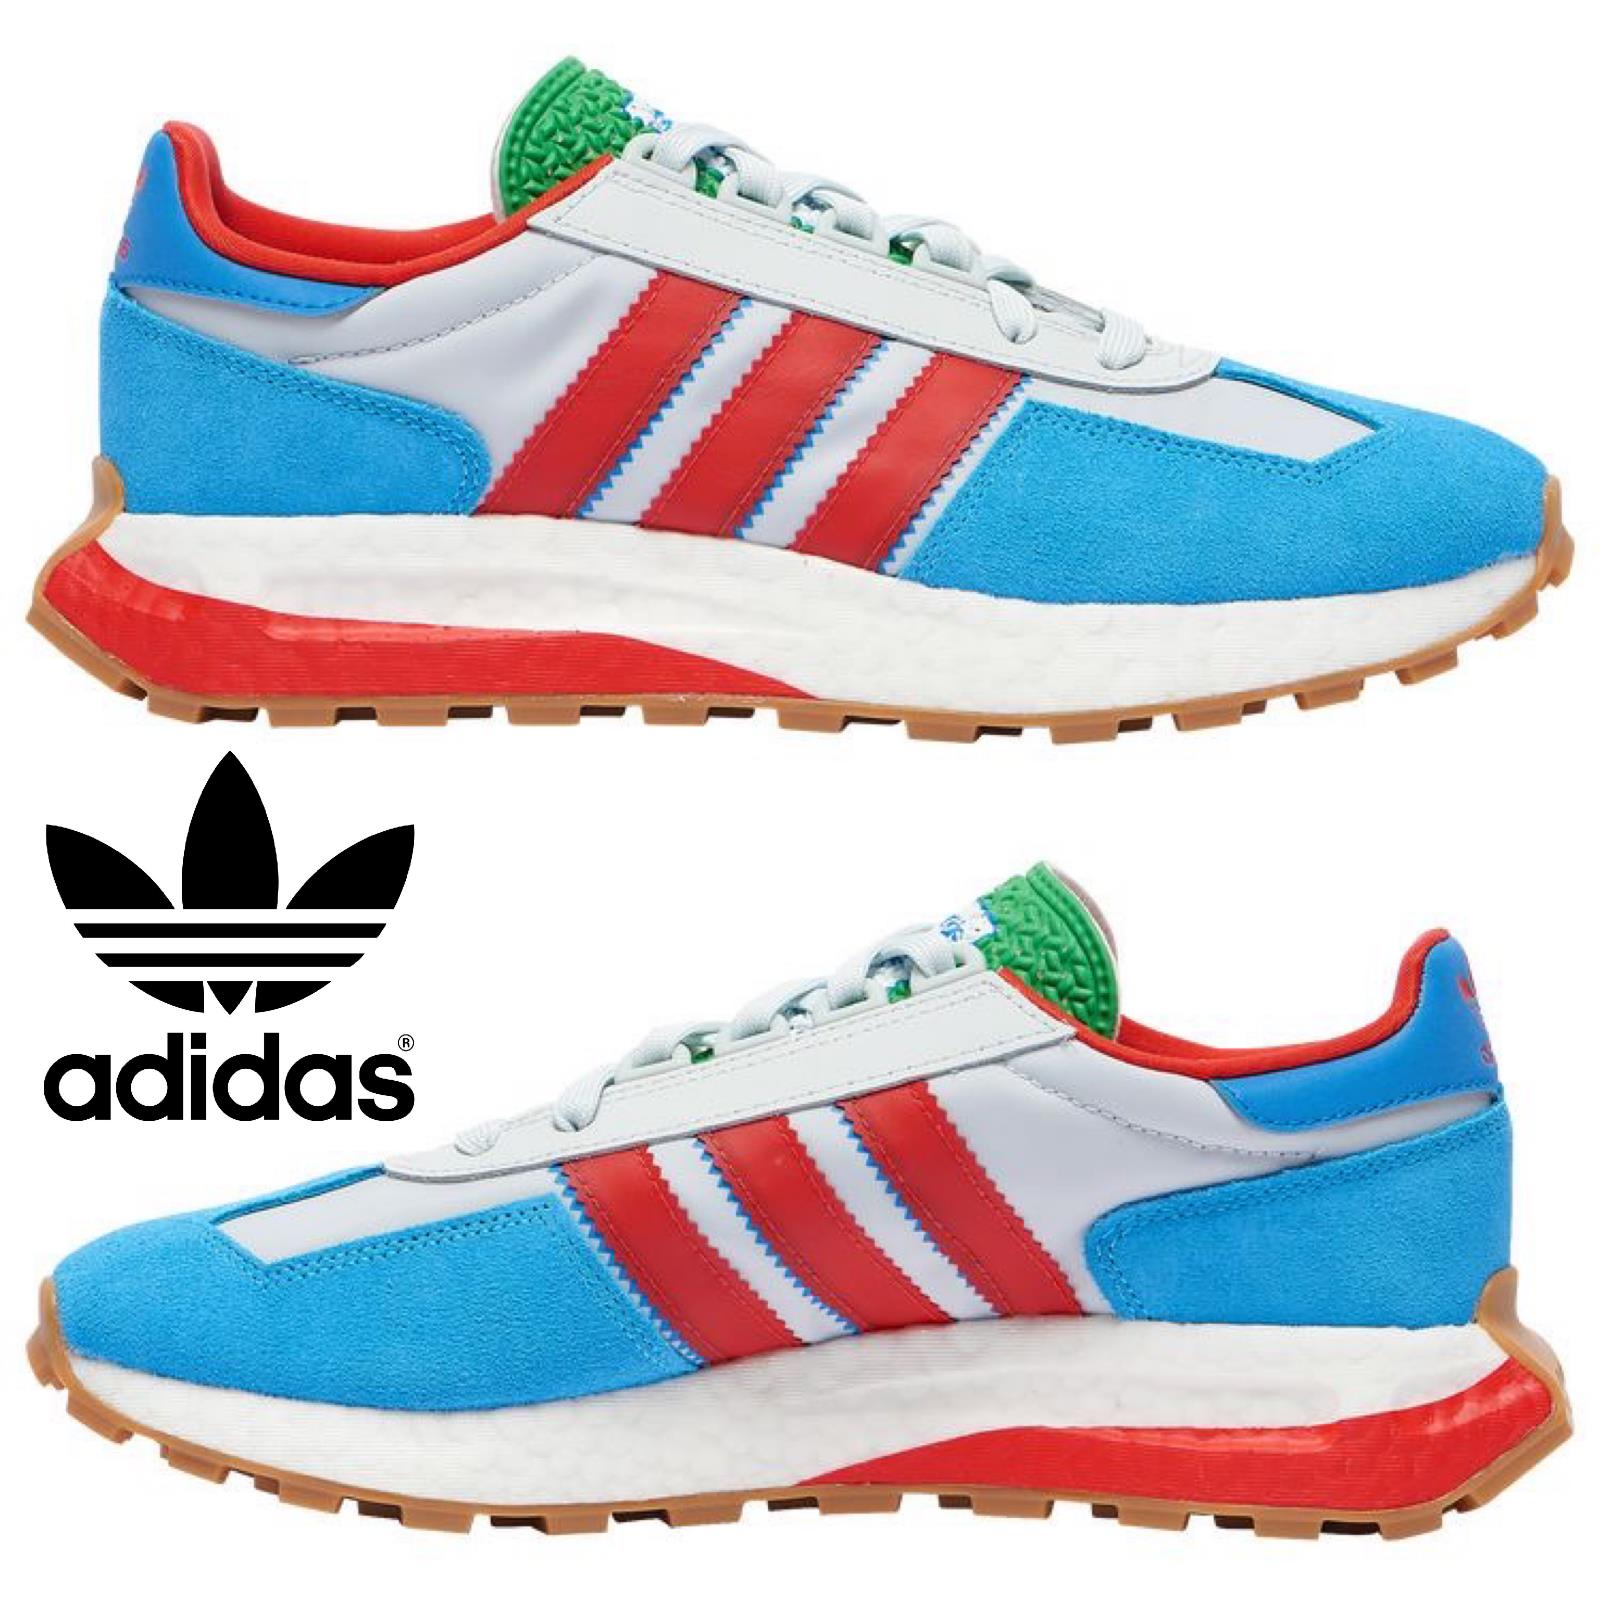 Adidas Retropy E5 Men`s Sneakers Running Shoes Gym Casual Sport Gray Red Blue - Blue , Grey/Red/Blue Manufacturer